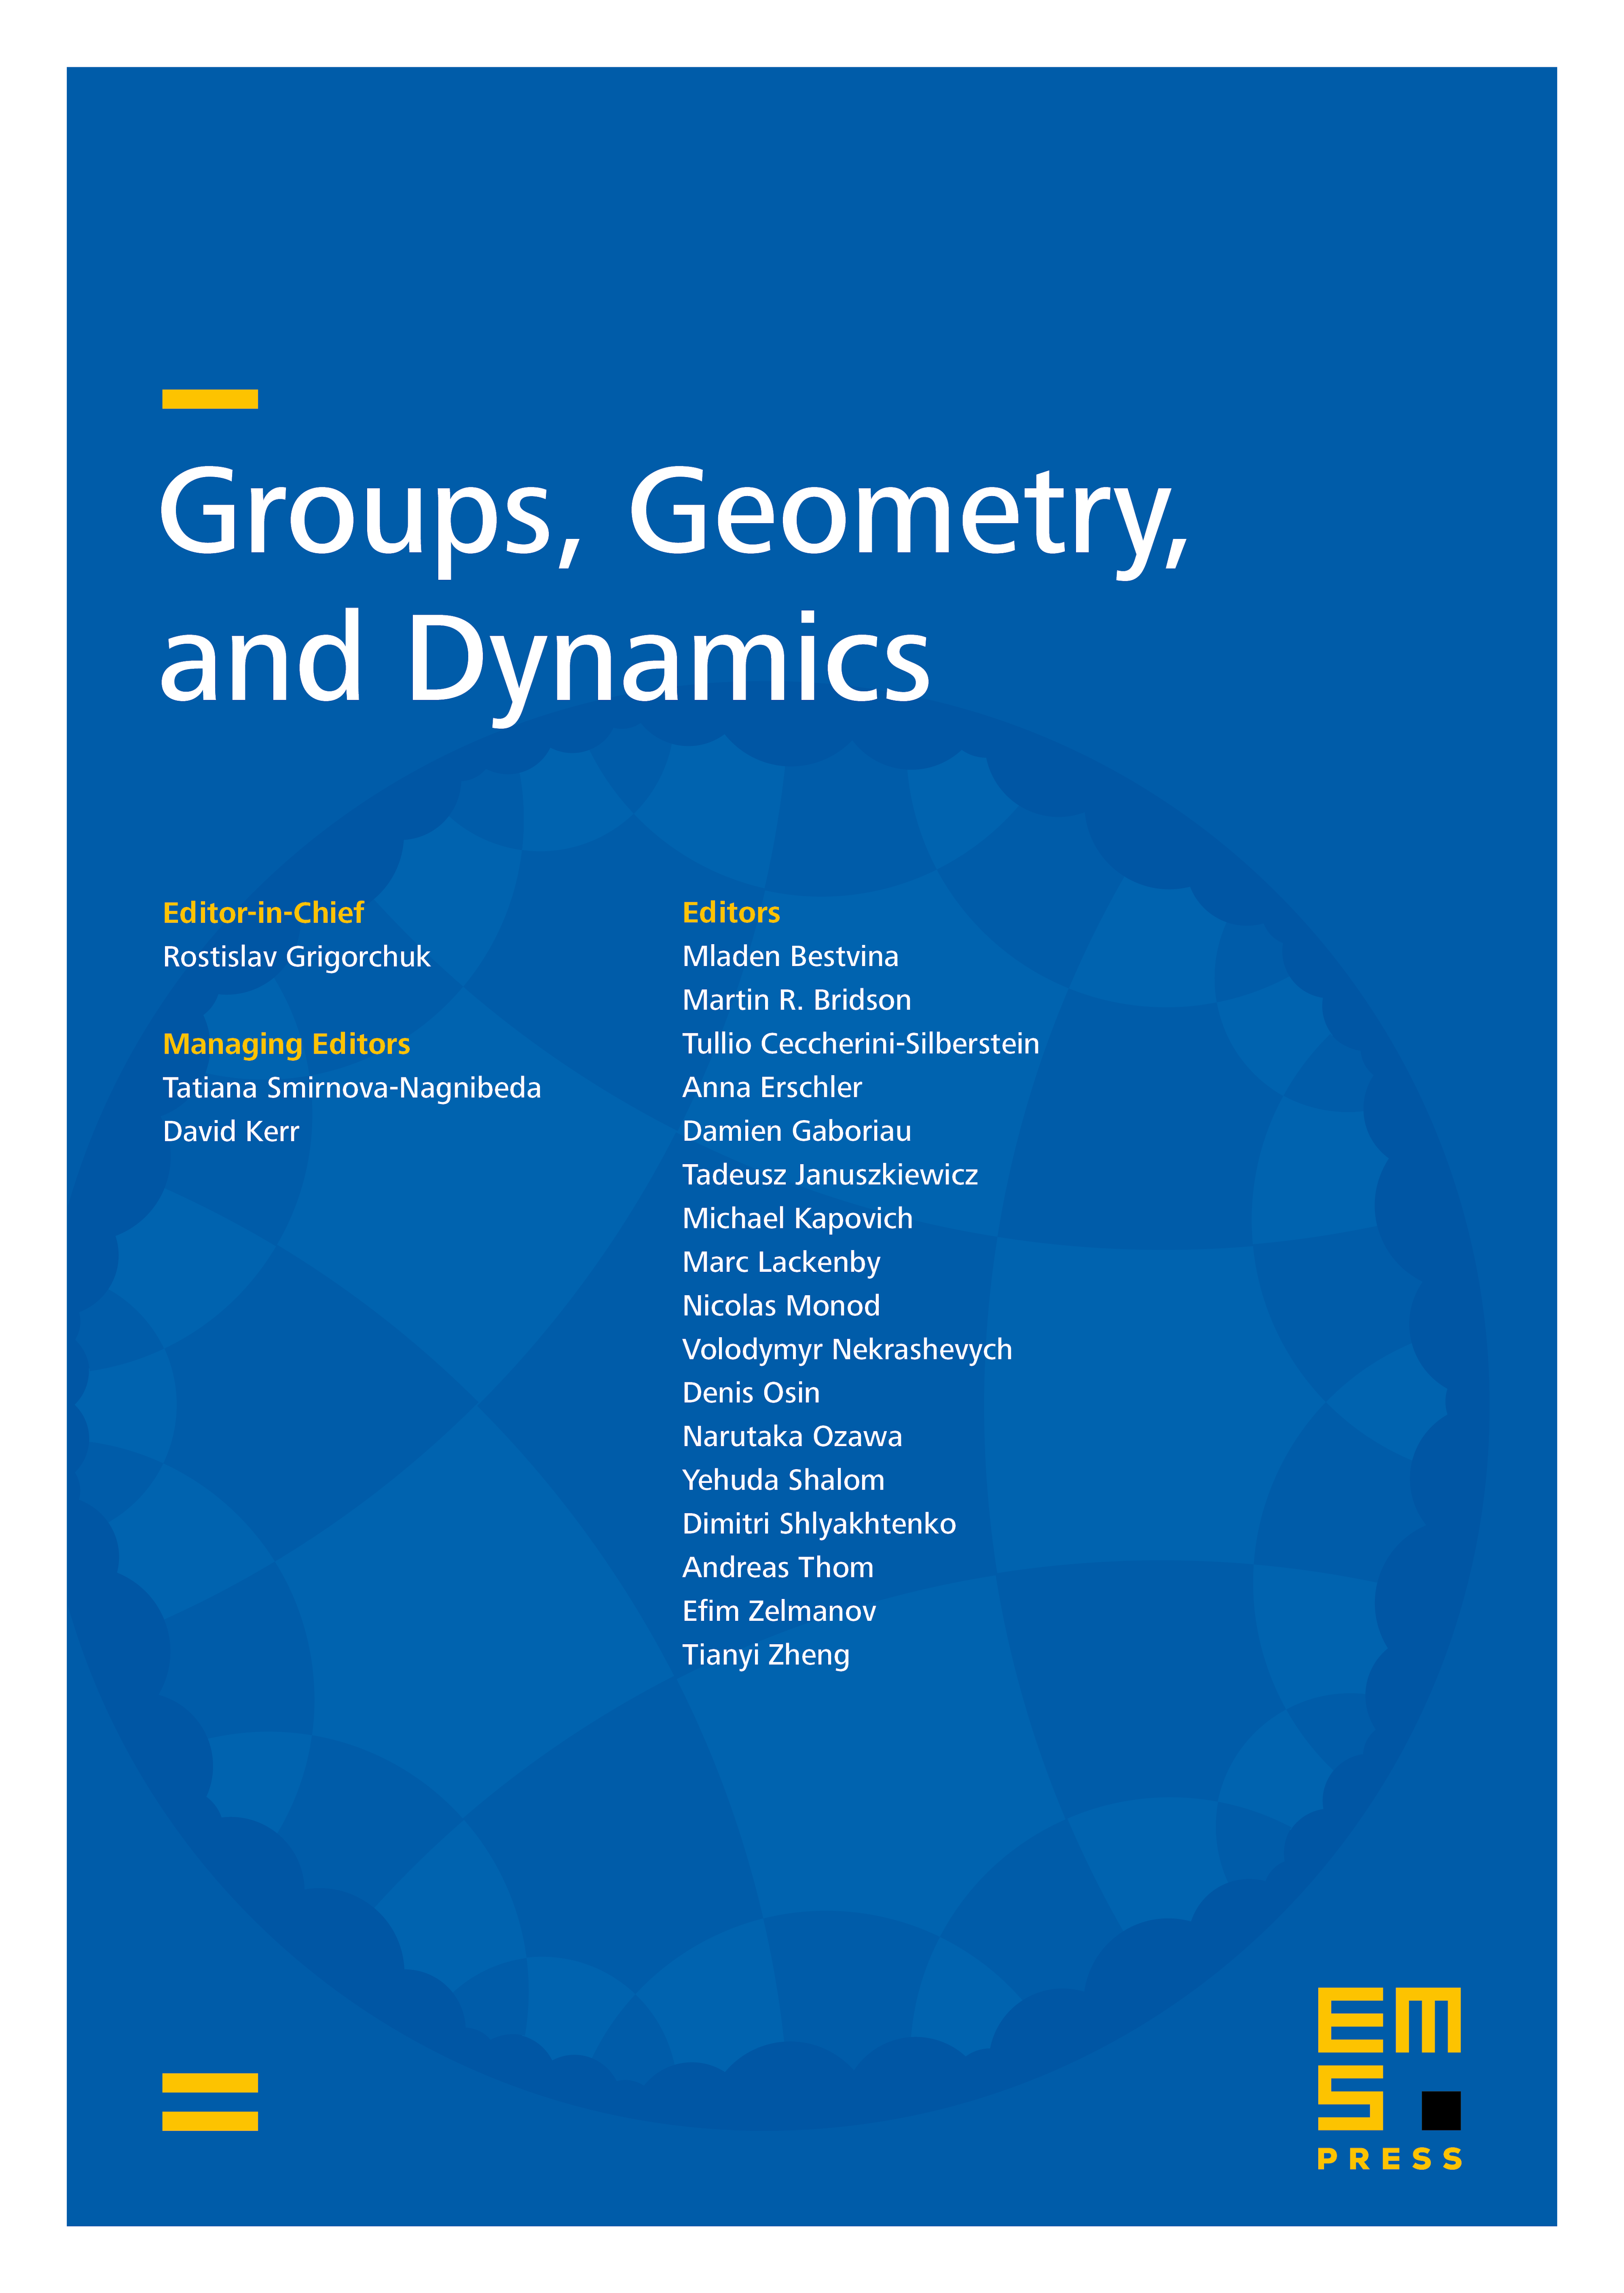 The automorphism group of Rauzy diagrams cover